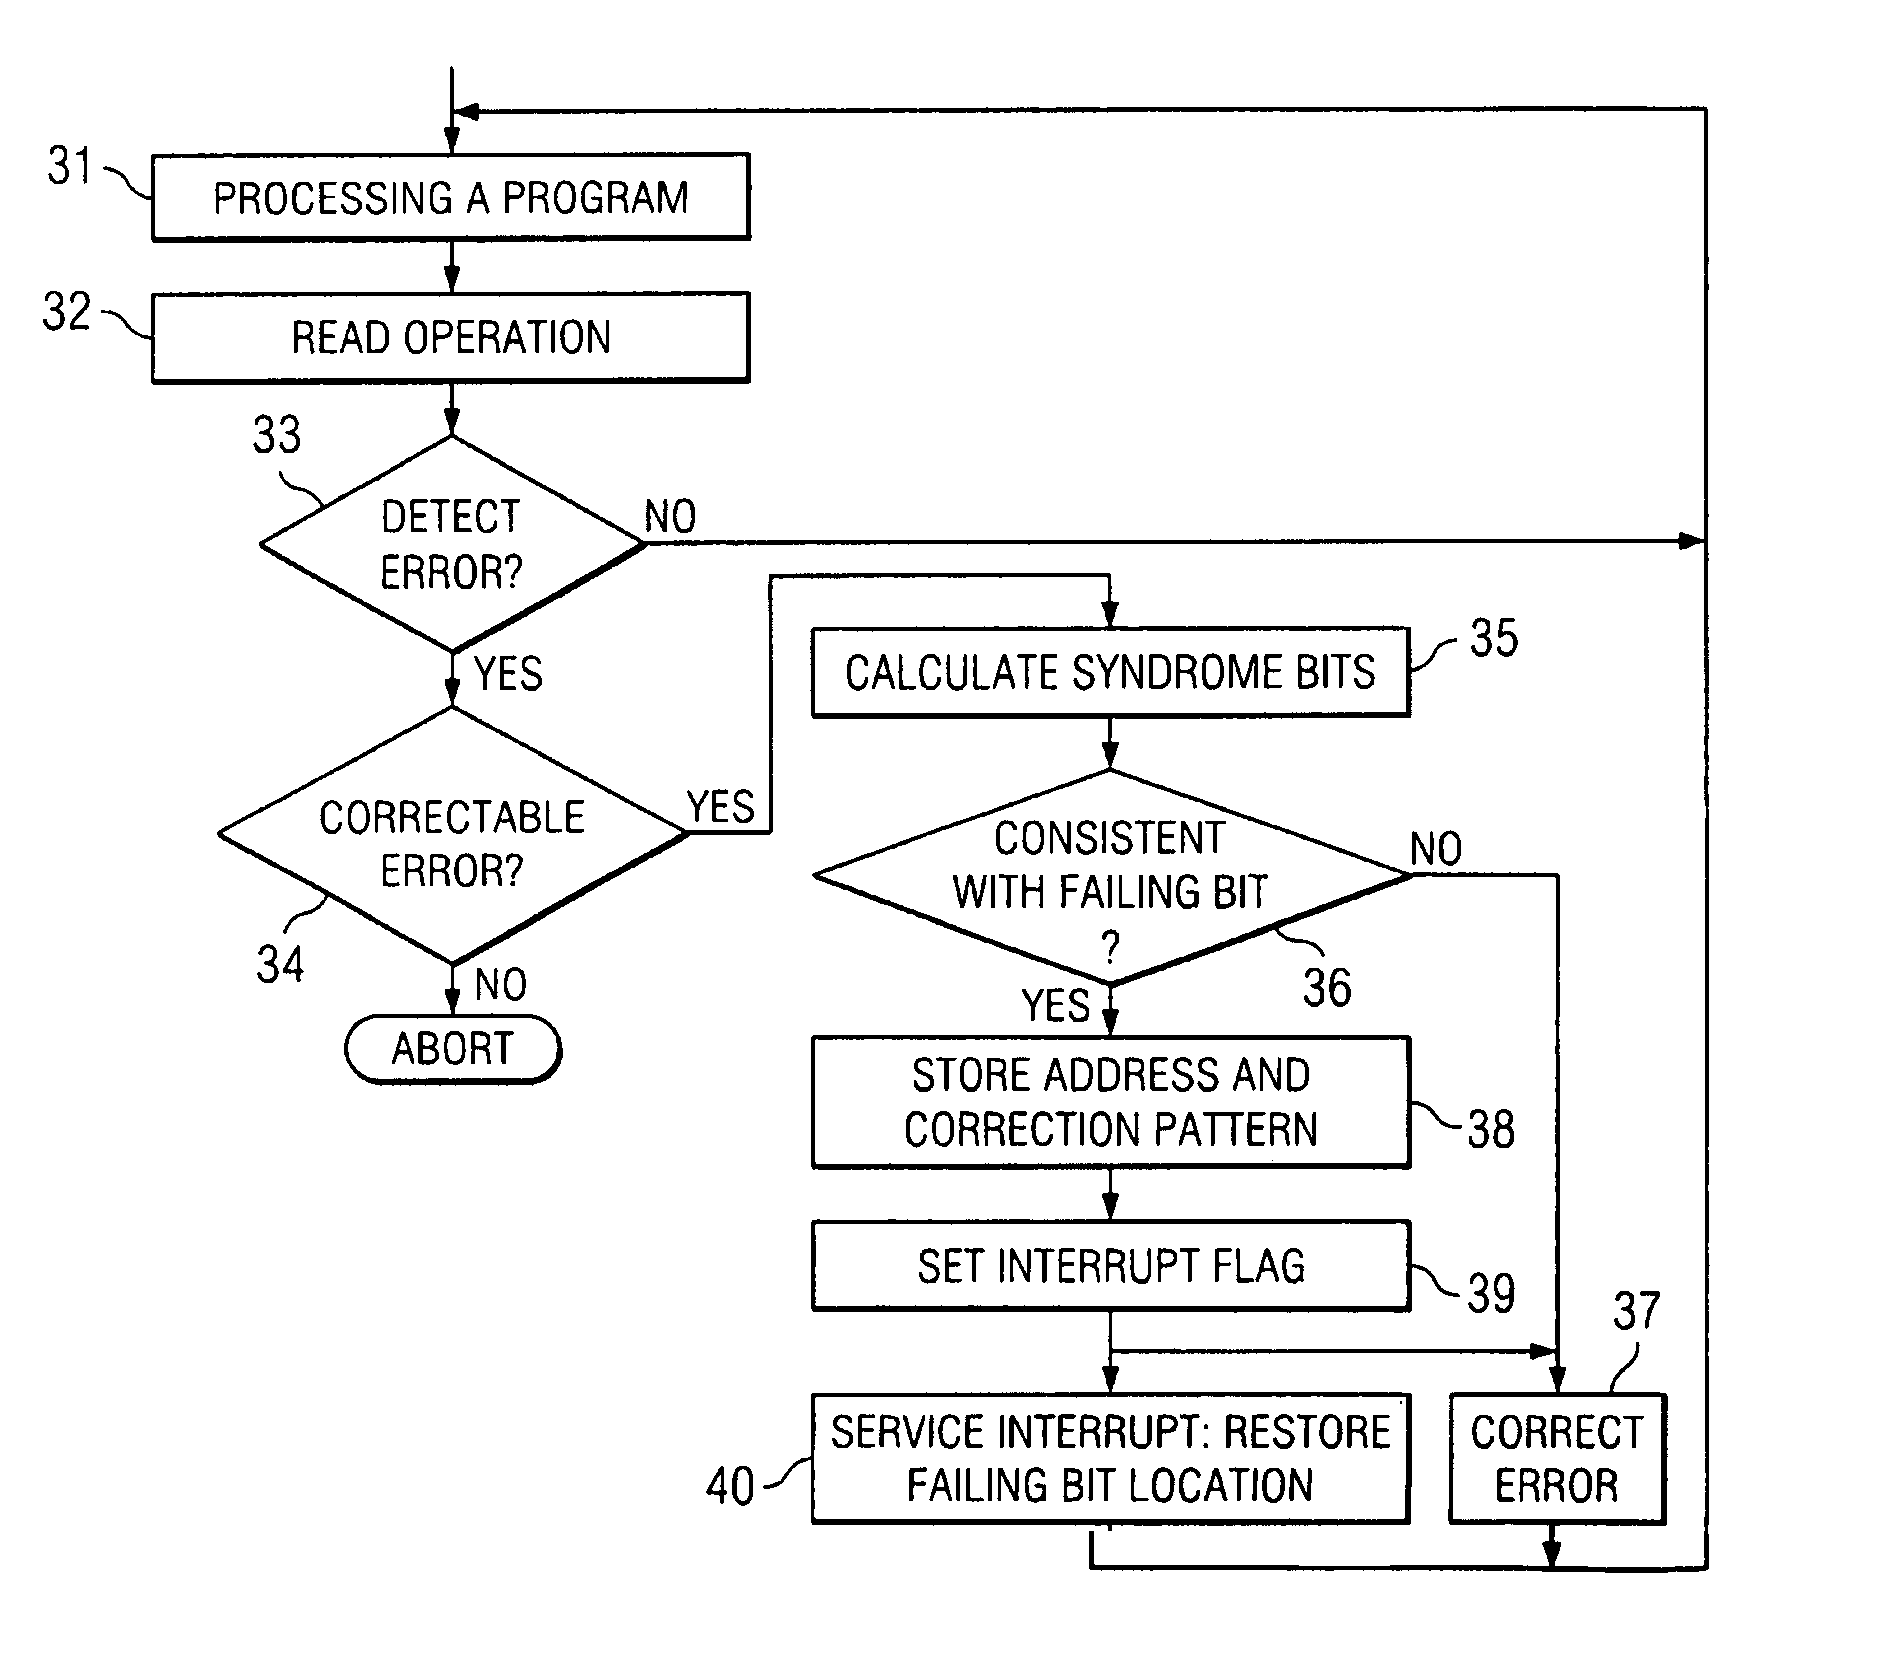 Apparatus and method for responding to data retention loss in a non-volatile memory unit using error checking and correction techniques